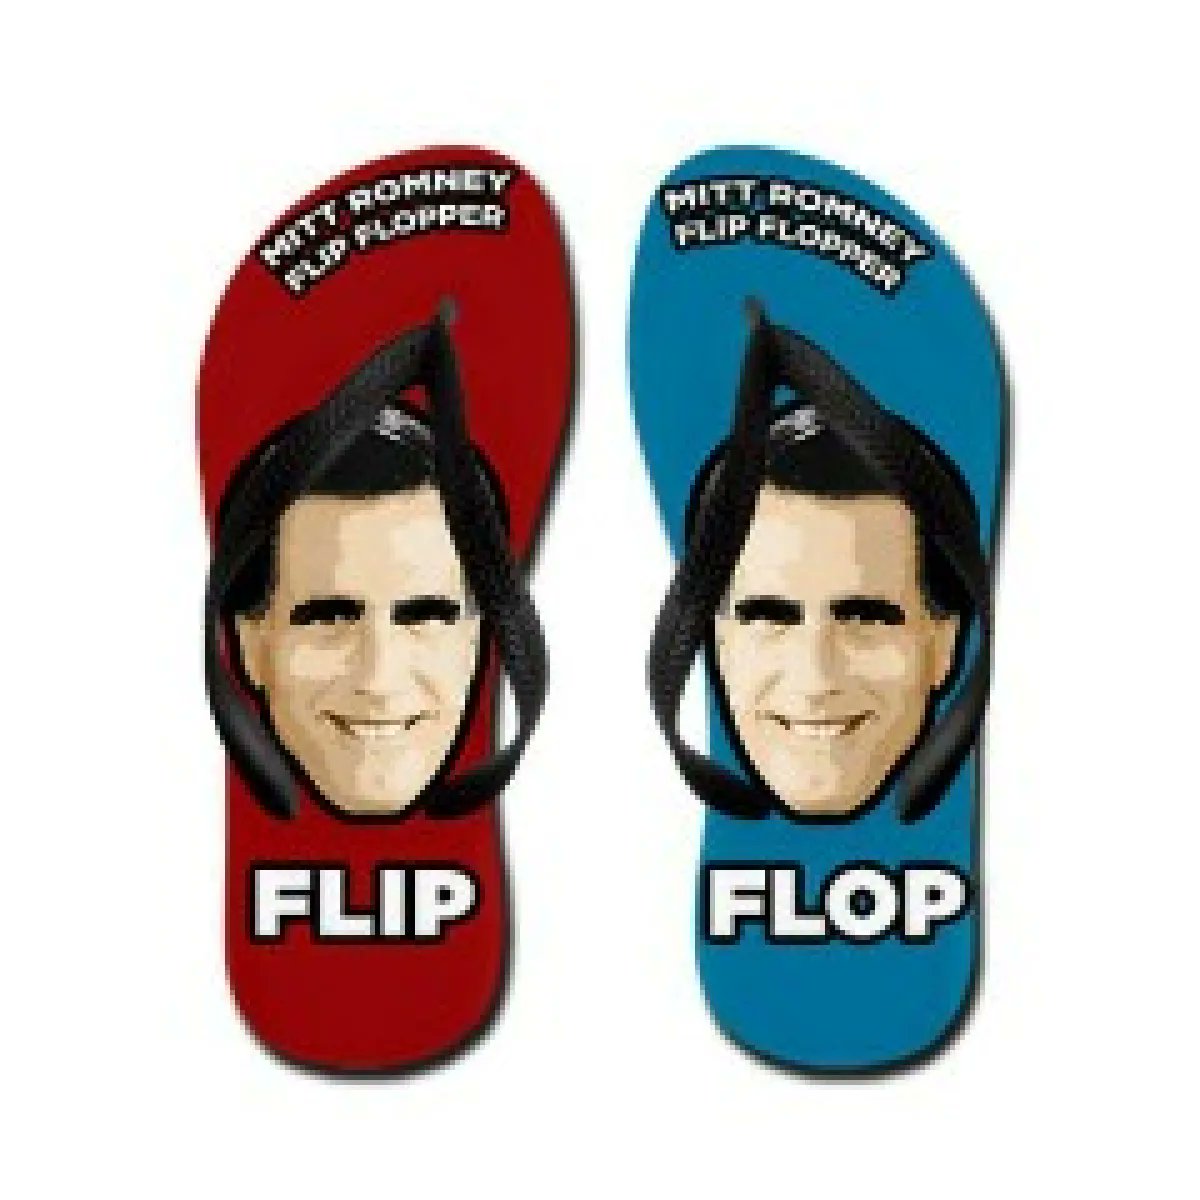 I never believe one thing @SenatorRomney says
Not an honest bone in his body 
Always trying to tread the line between being a total sycophant & expressing an independent thought
He has & will always be known as #FlipFlopRomney
#VoteOutAllGOP